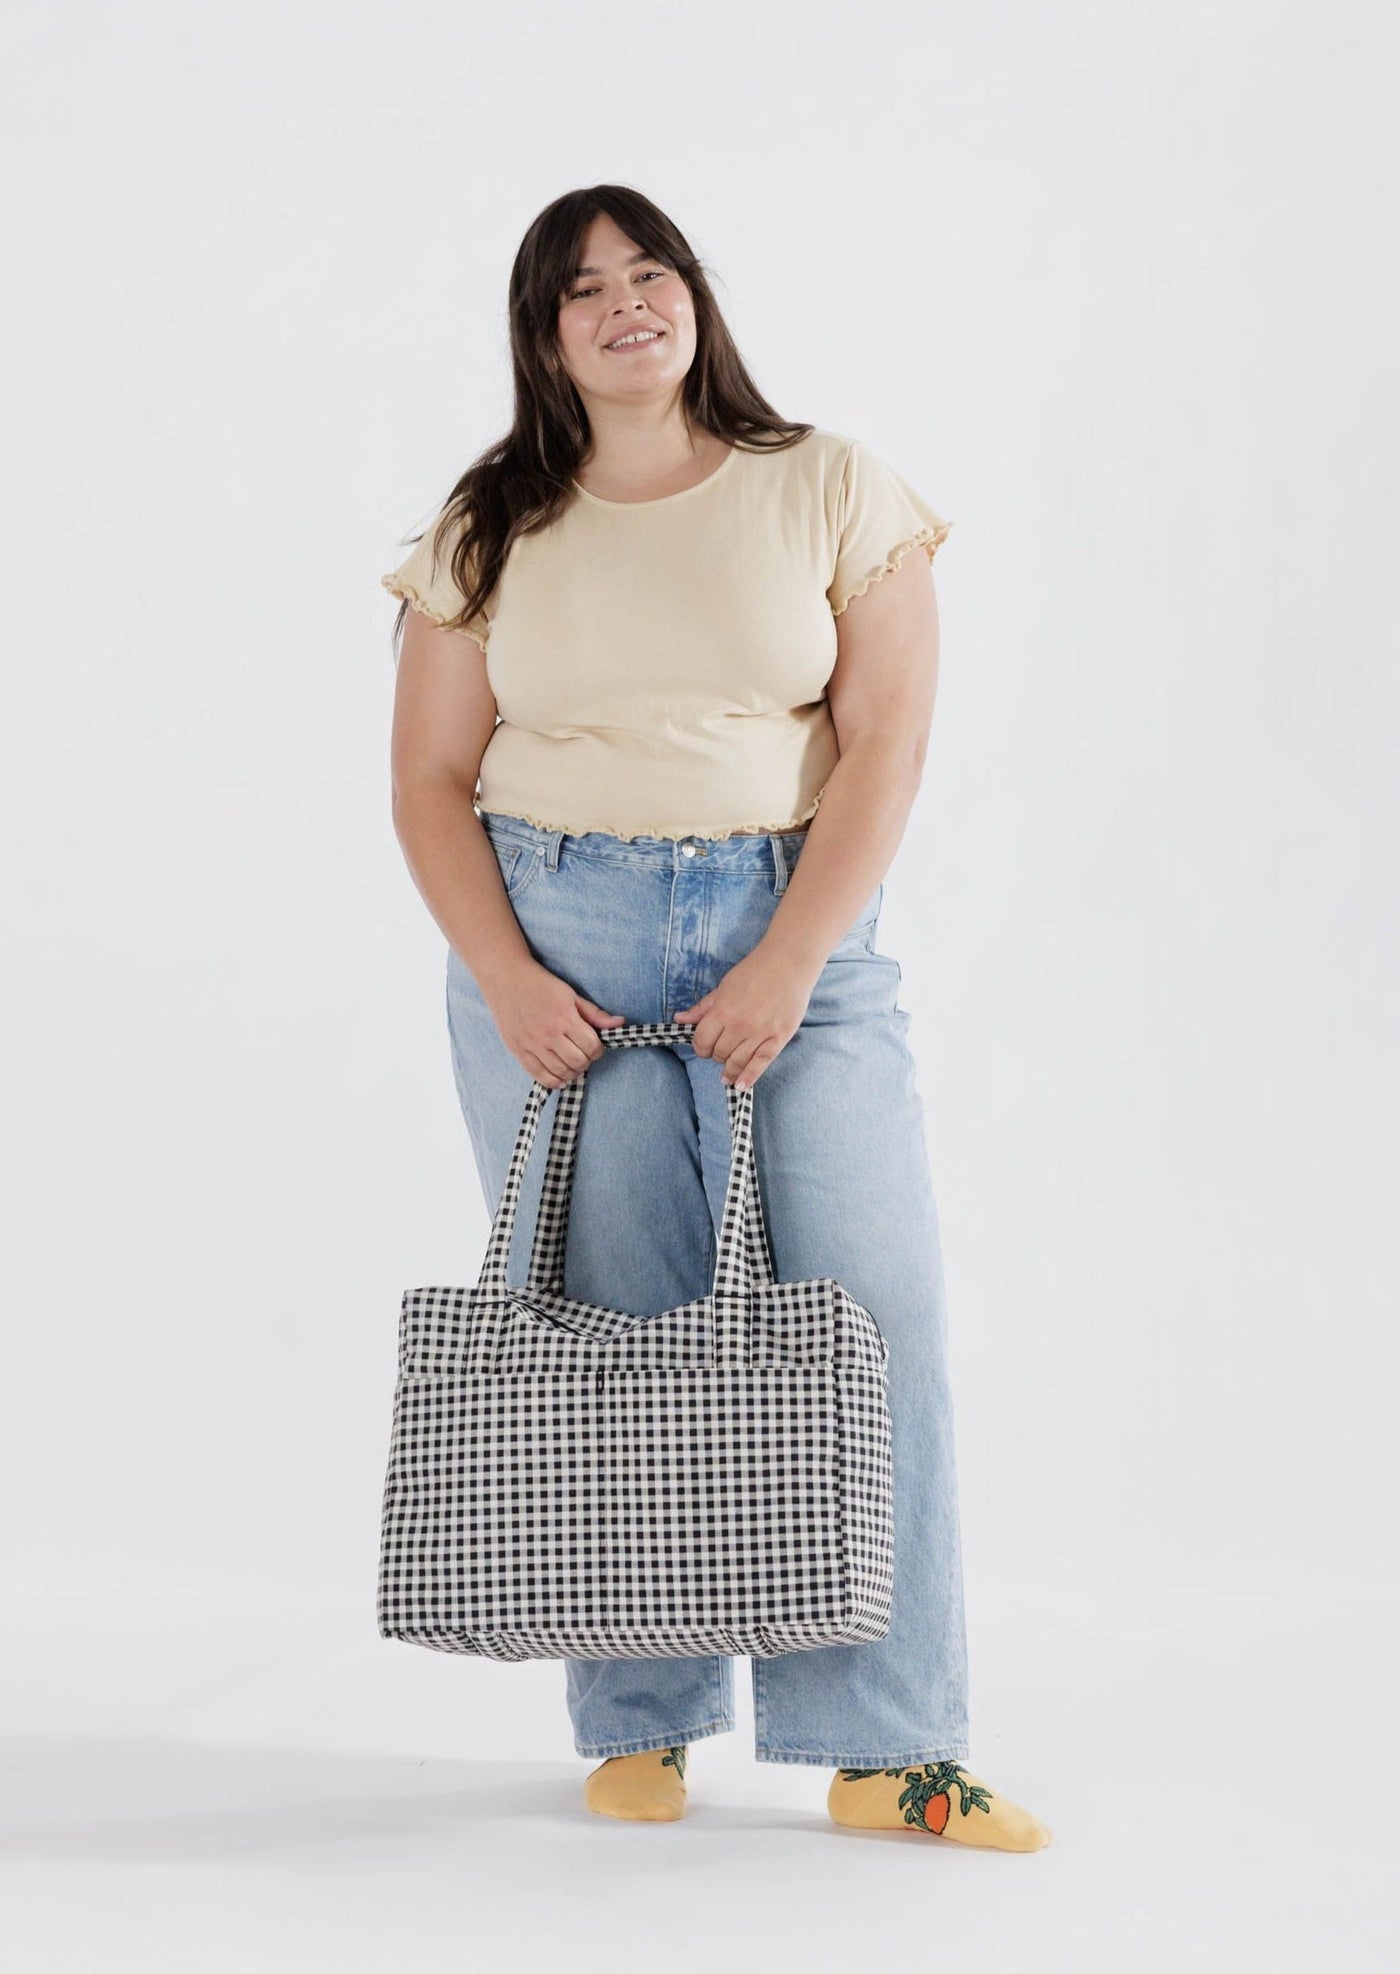 Cloud Bag Carry-On, Black and White Gingham